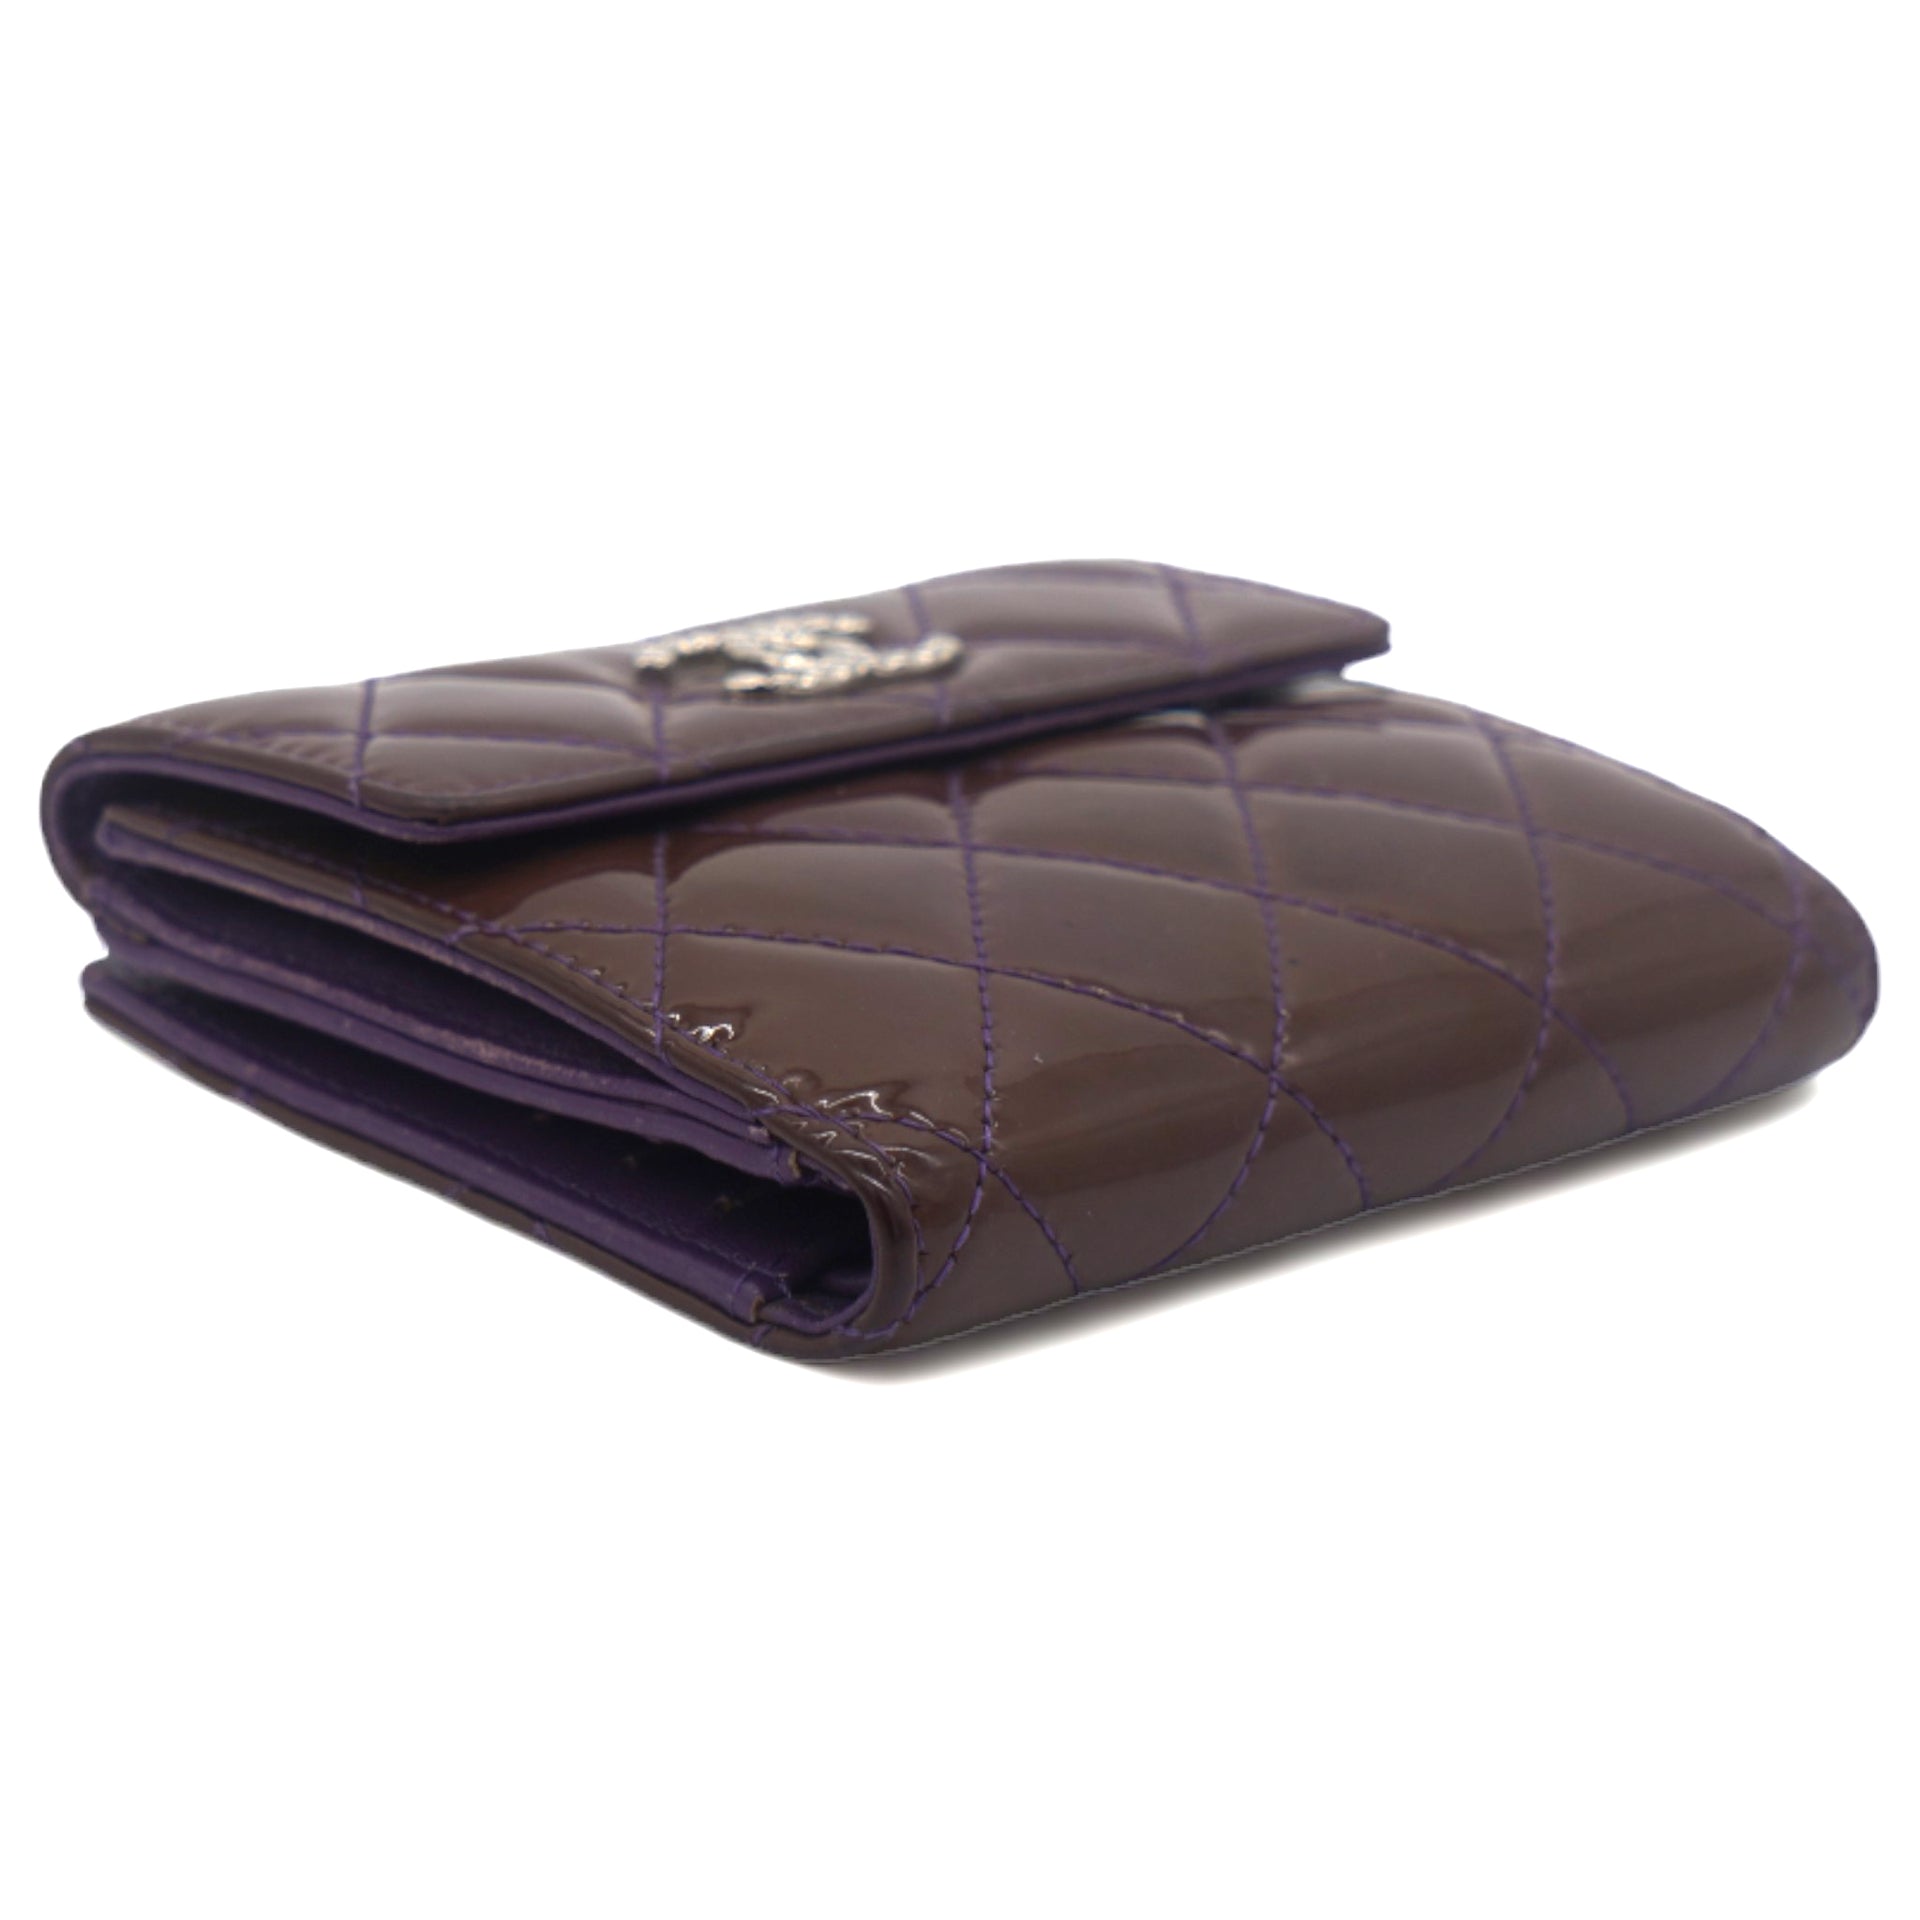 Purple Patent Classic Small Flap Wallet